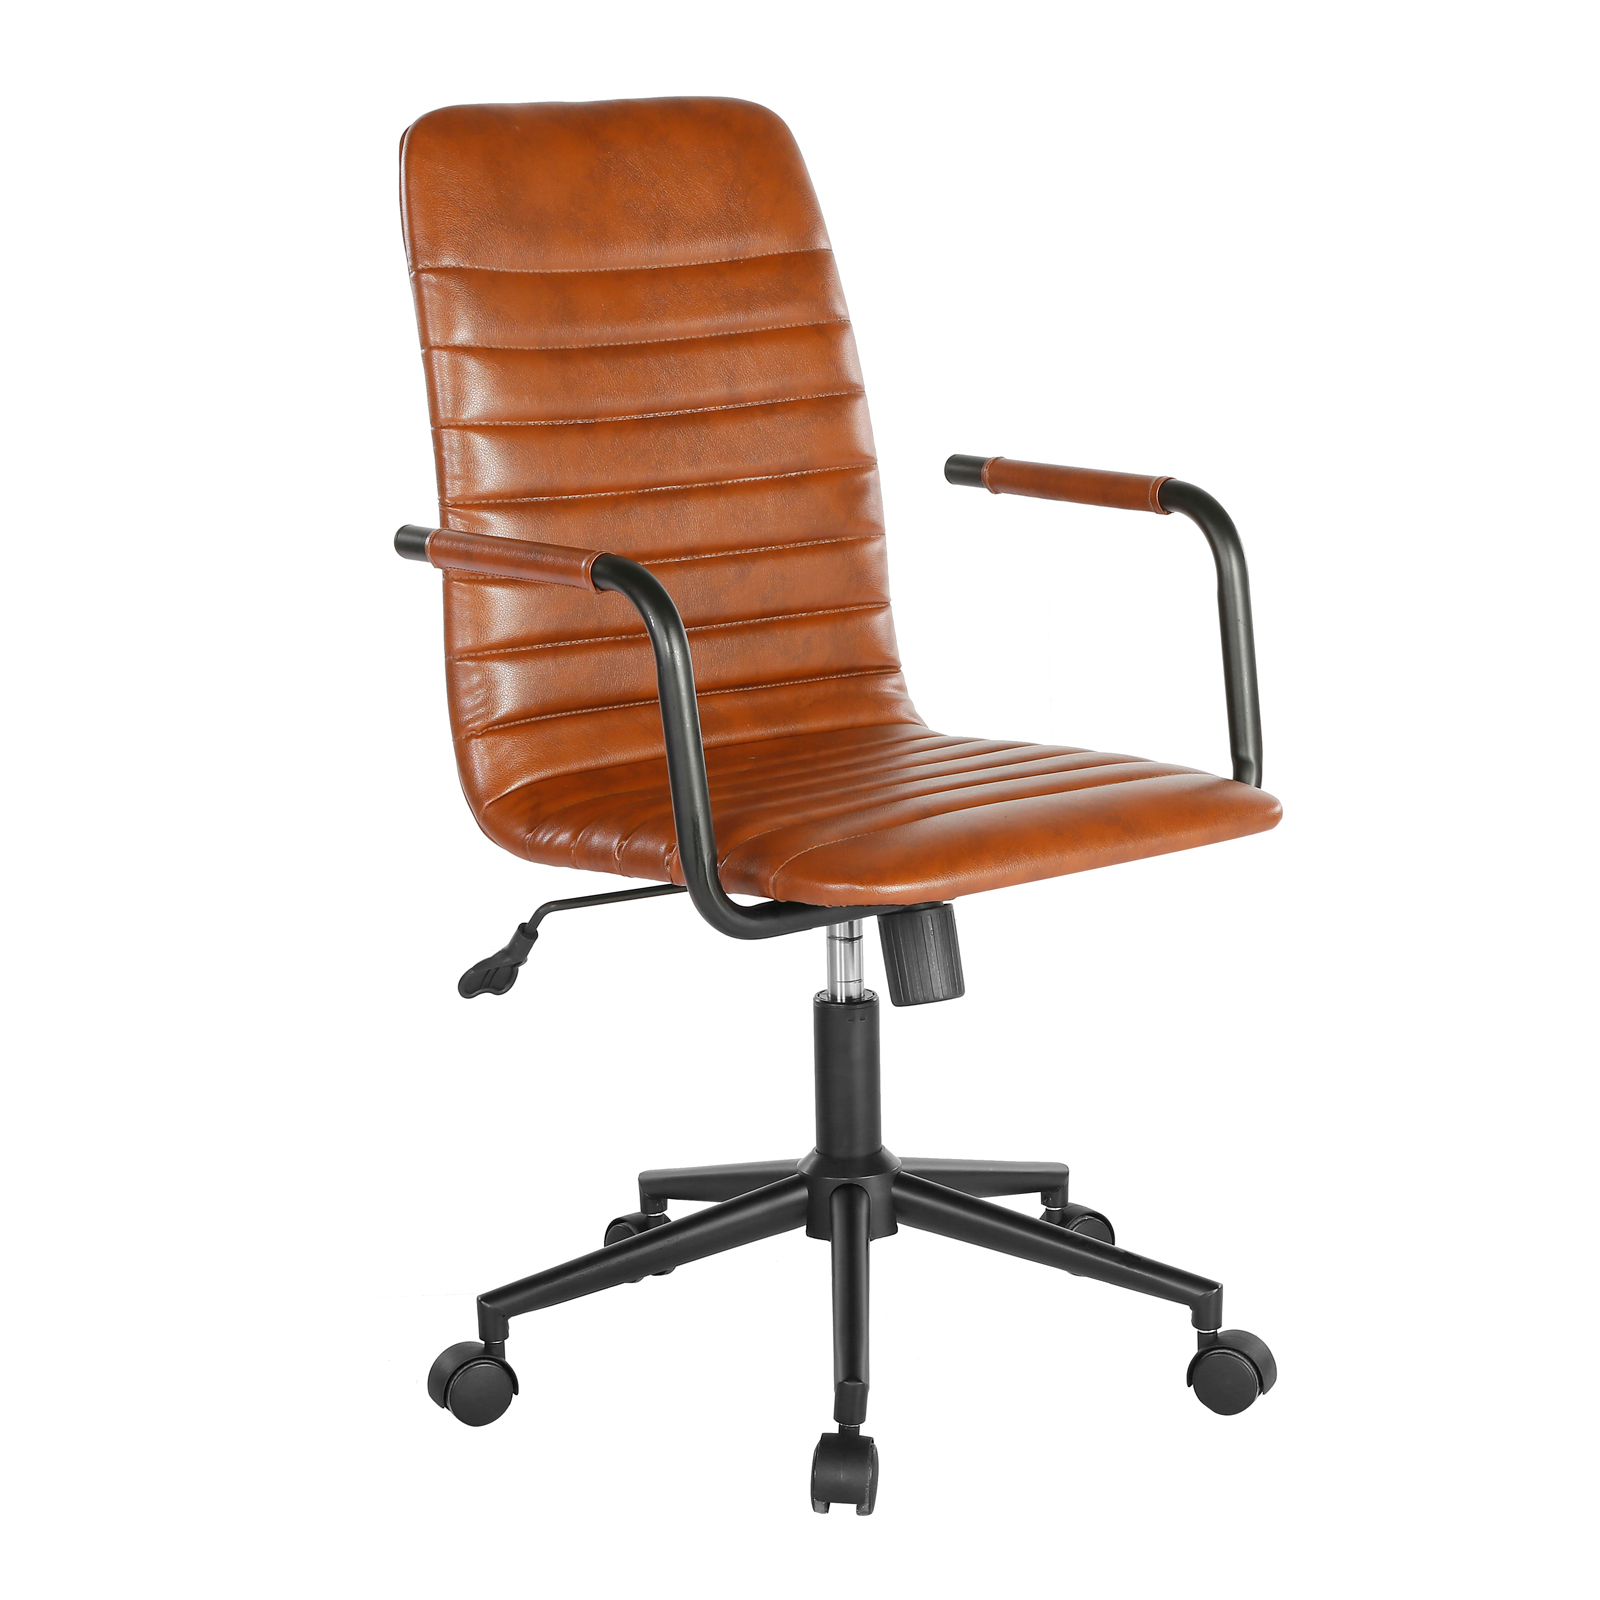 Beat medium back faux leather operators chair - brown